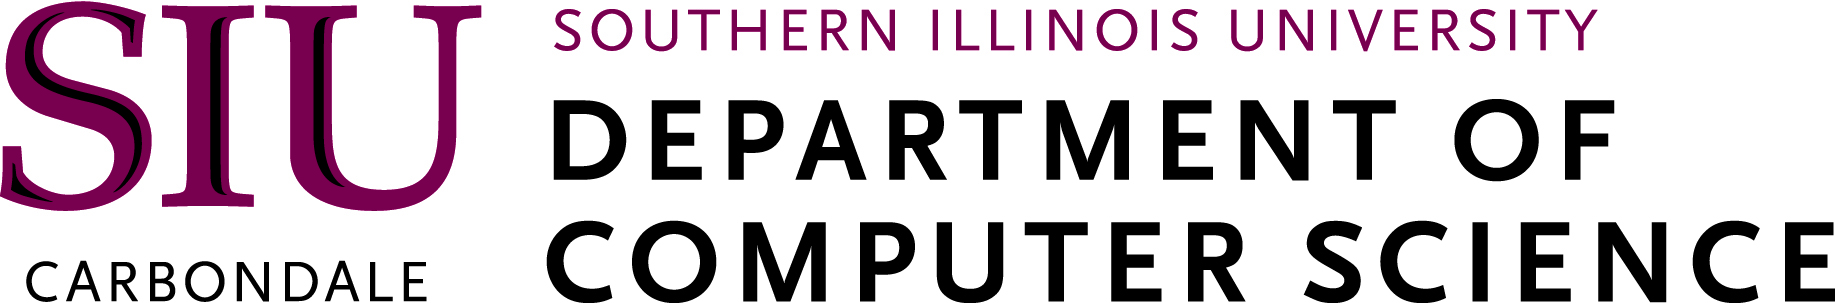 Department of Computer Science, Southern Illinois University